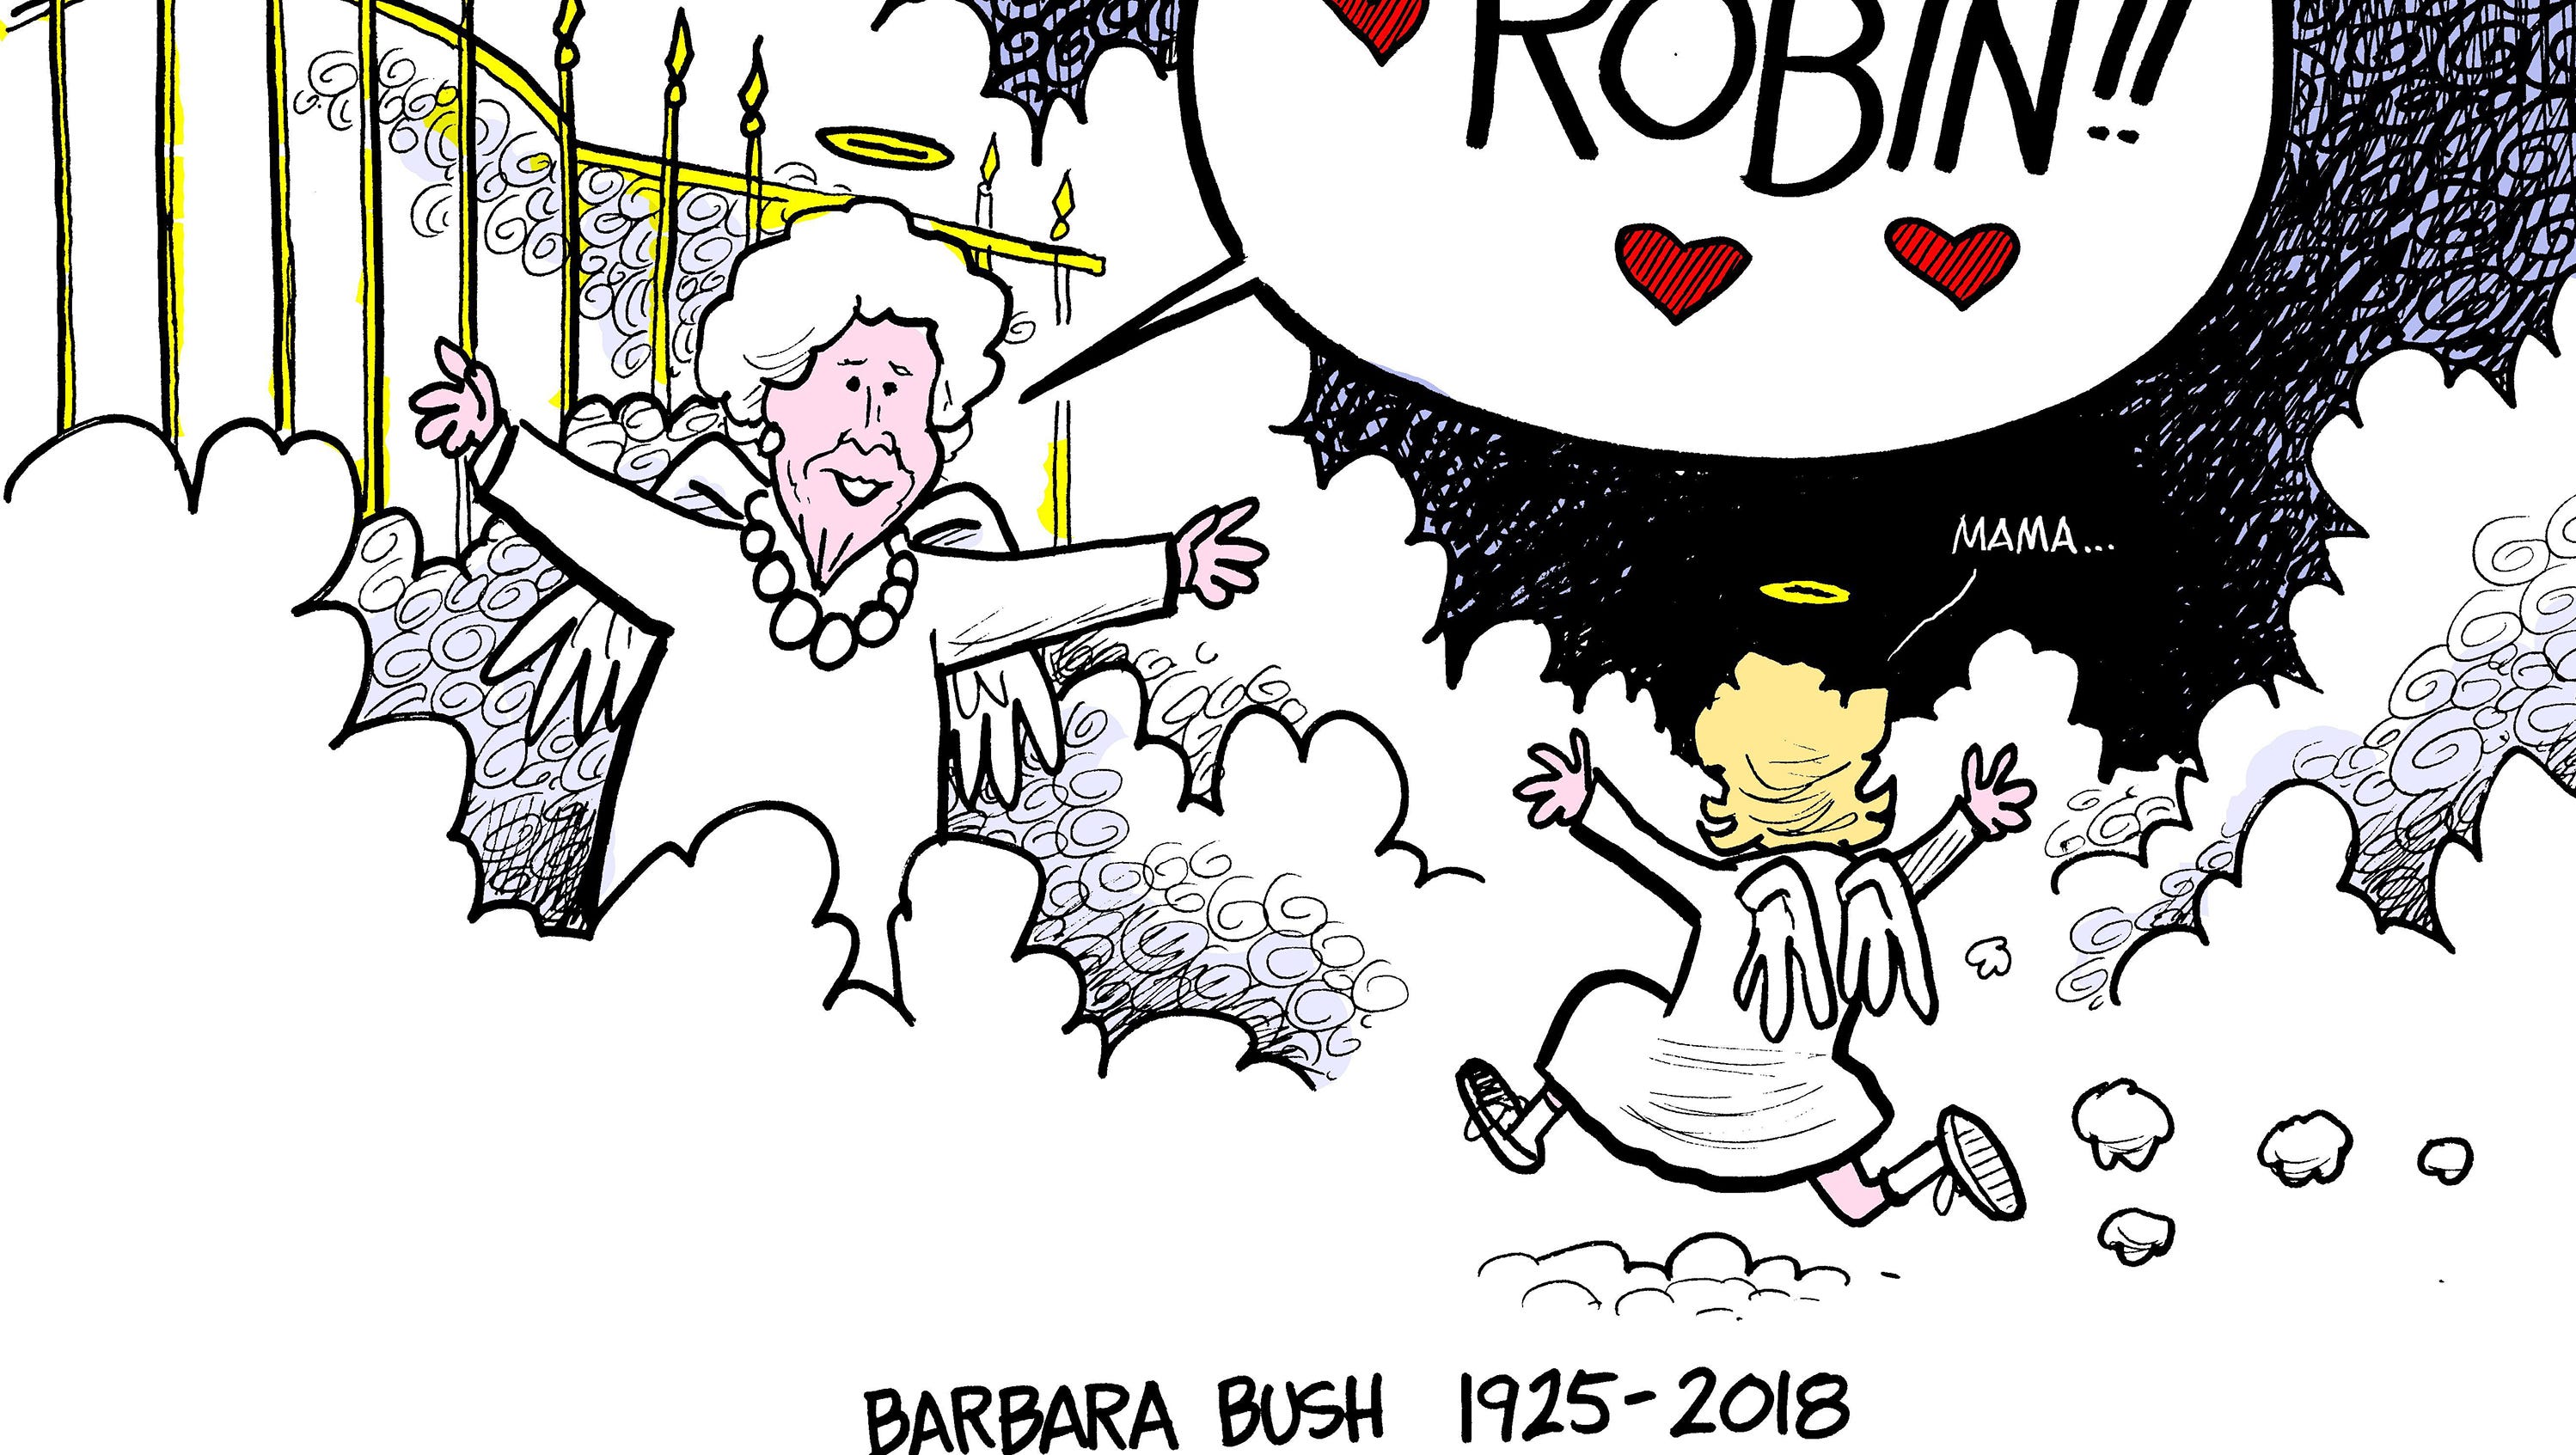 Barbara Bush: How editorial cartoon took on a life of its own